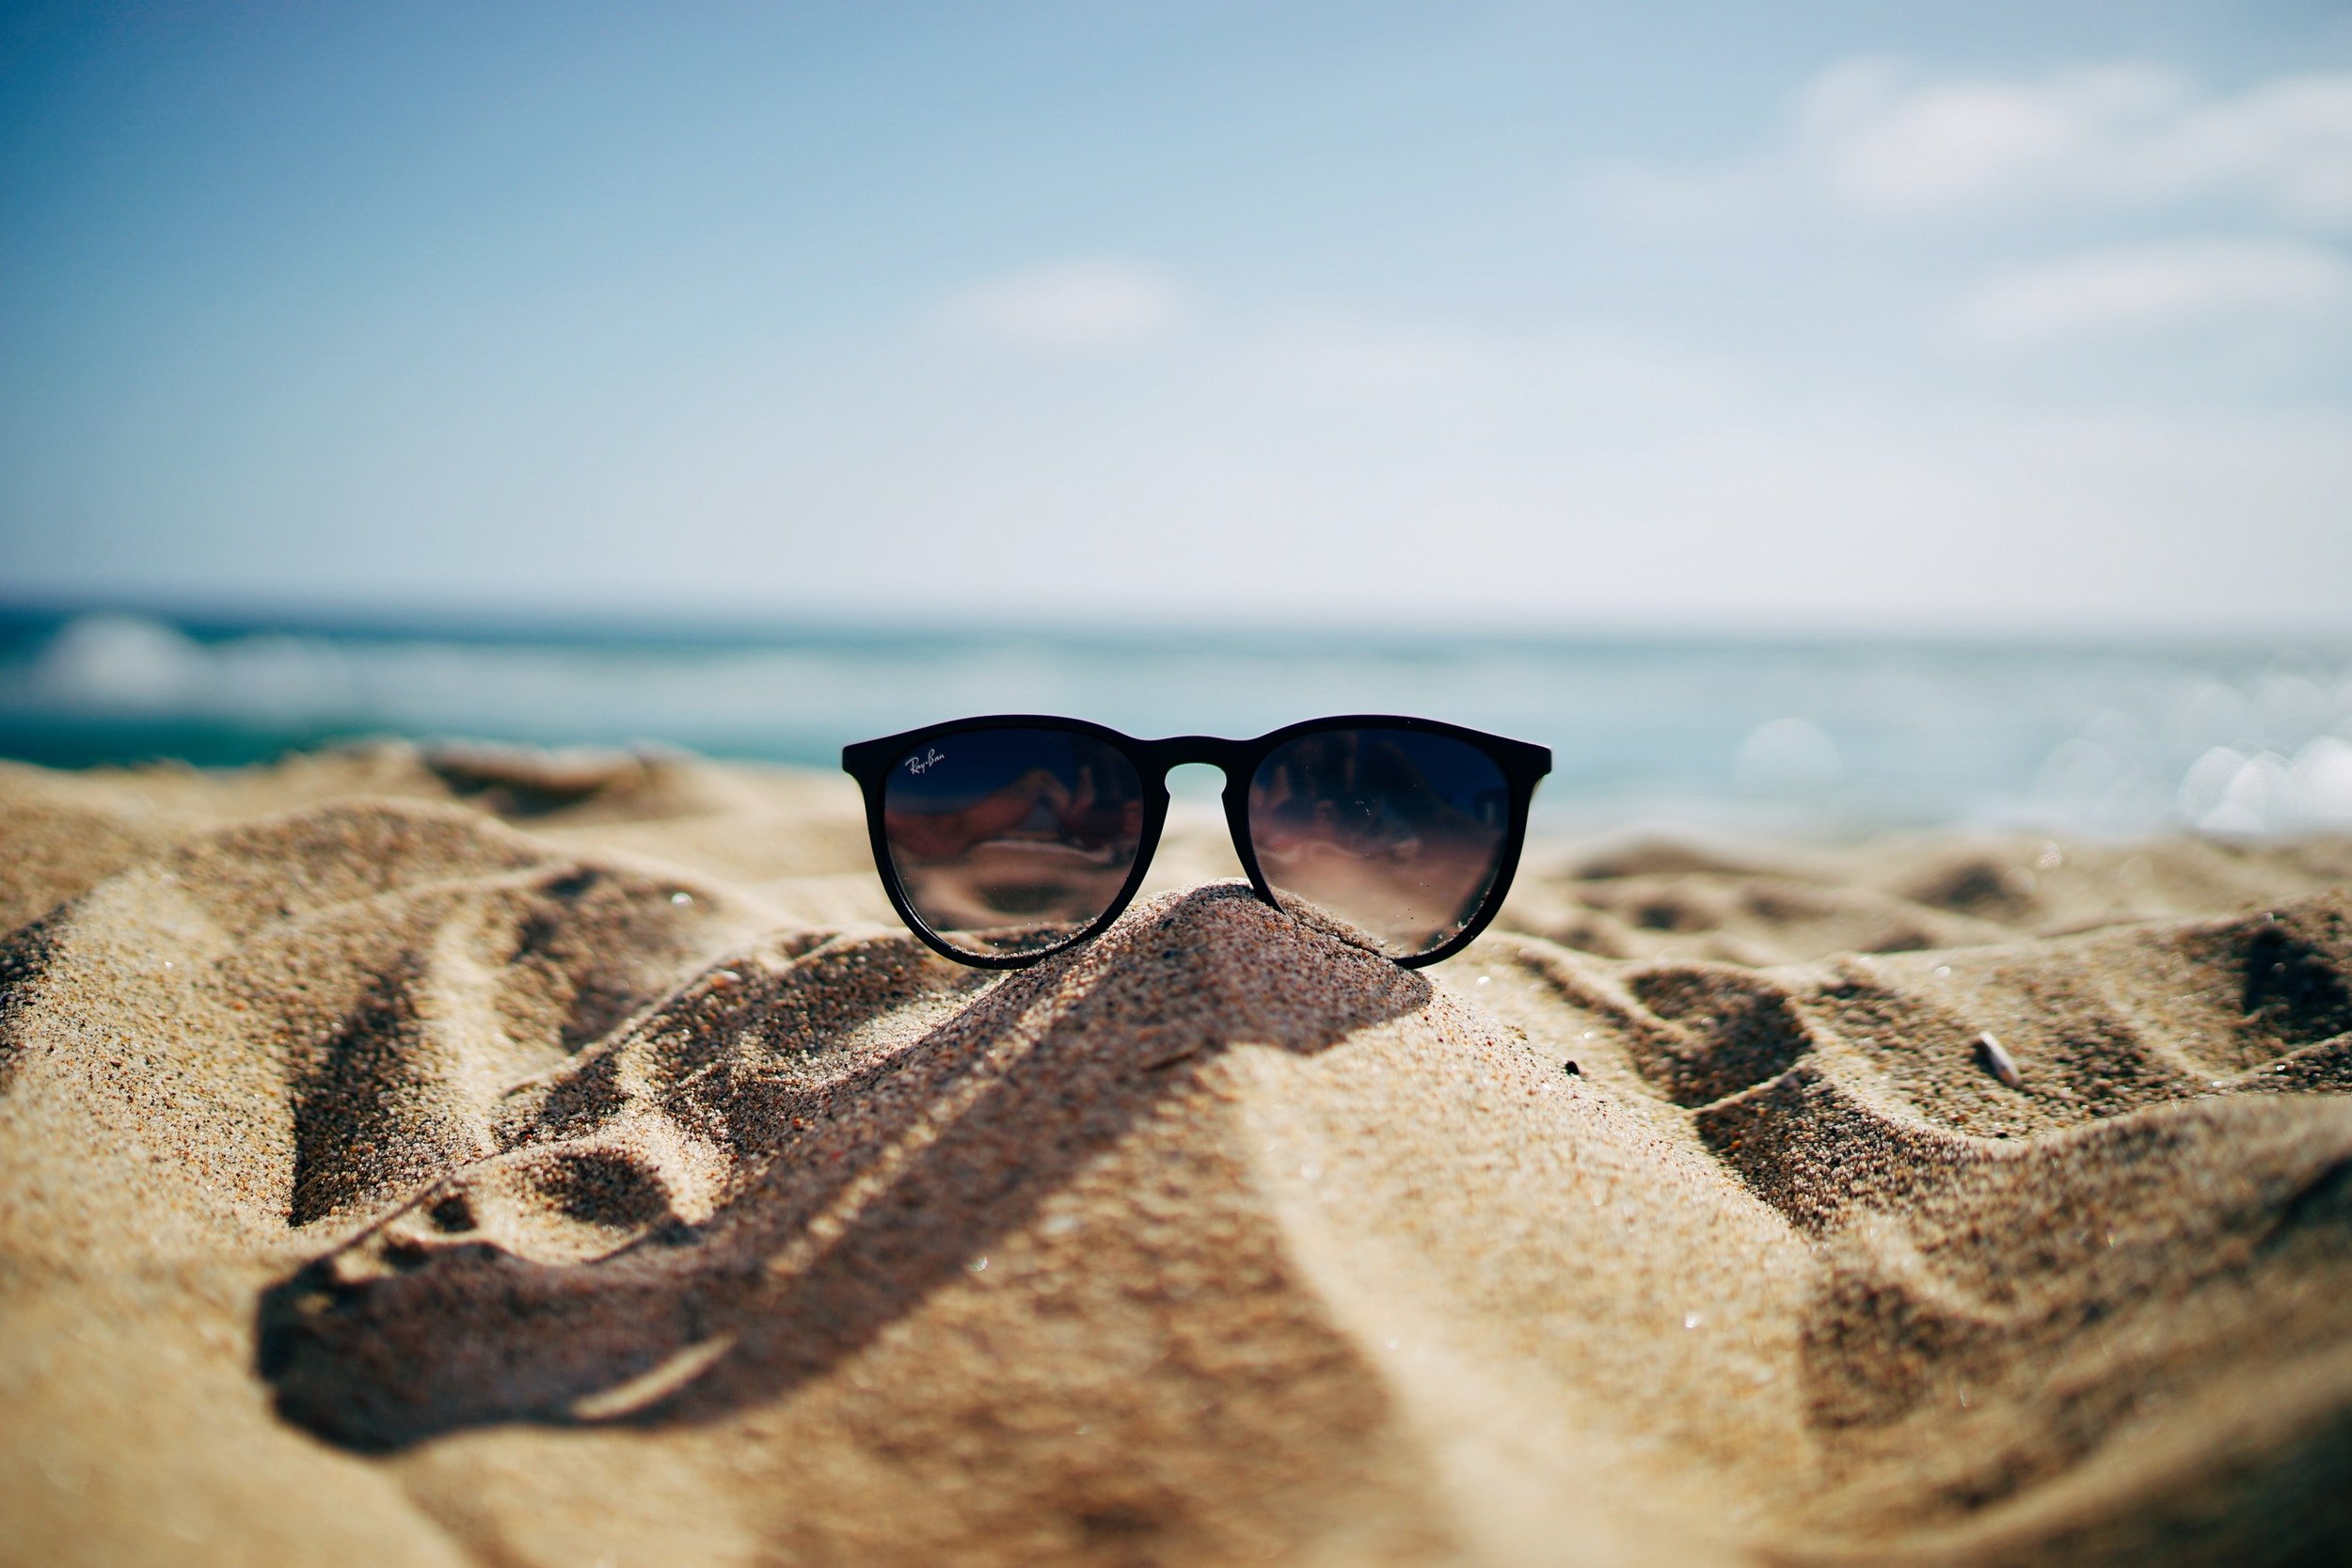 Sunglasses as one of your packing list for an island getaway